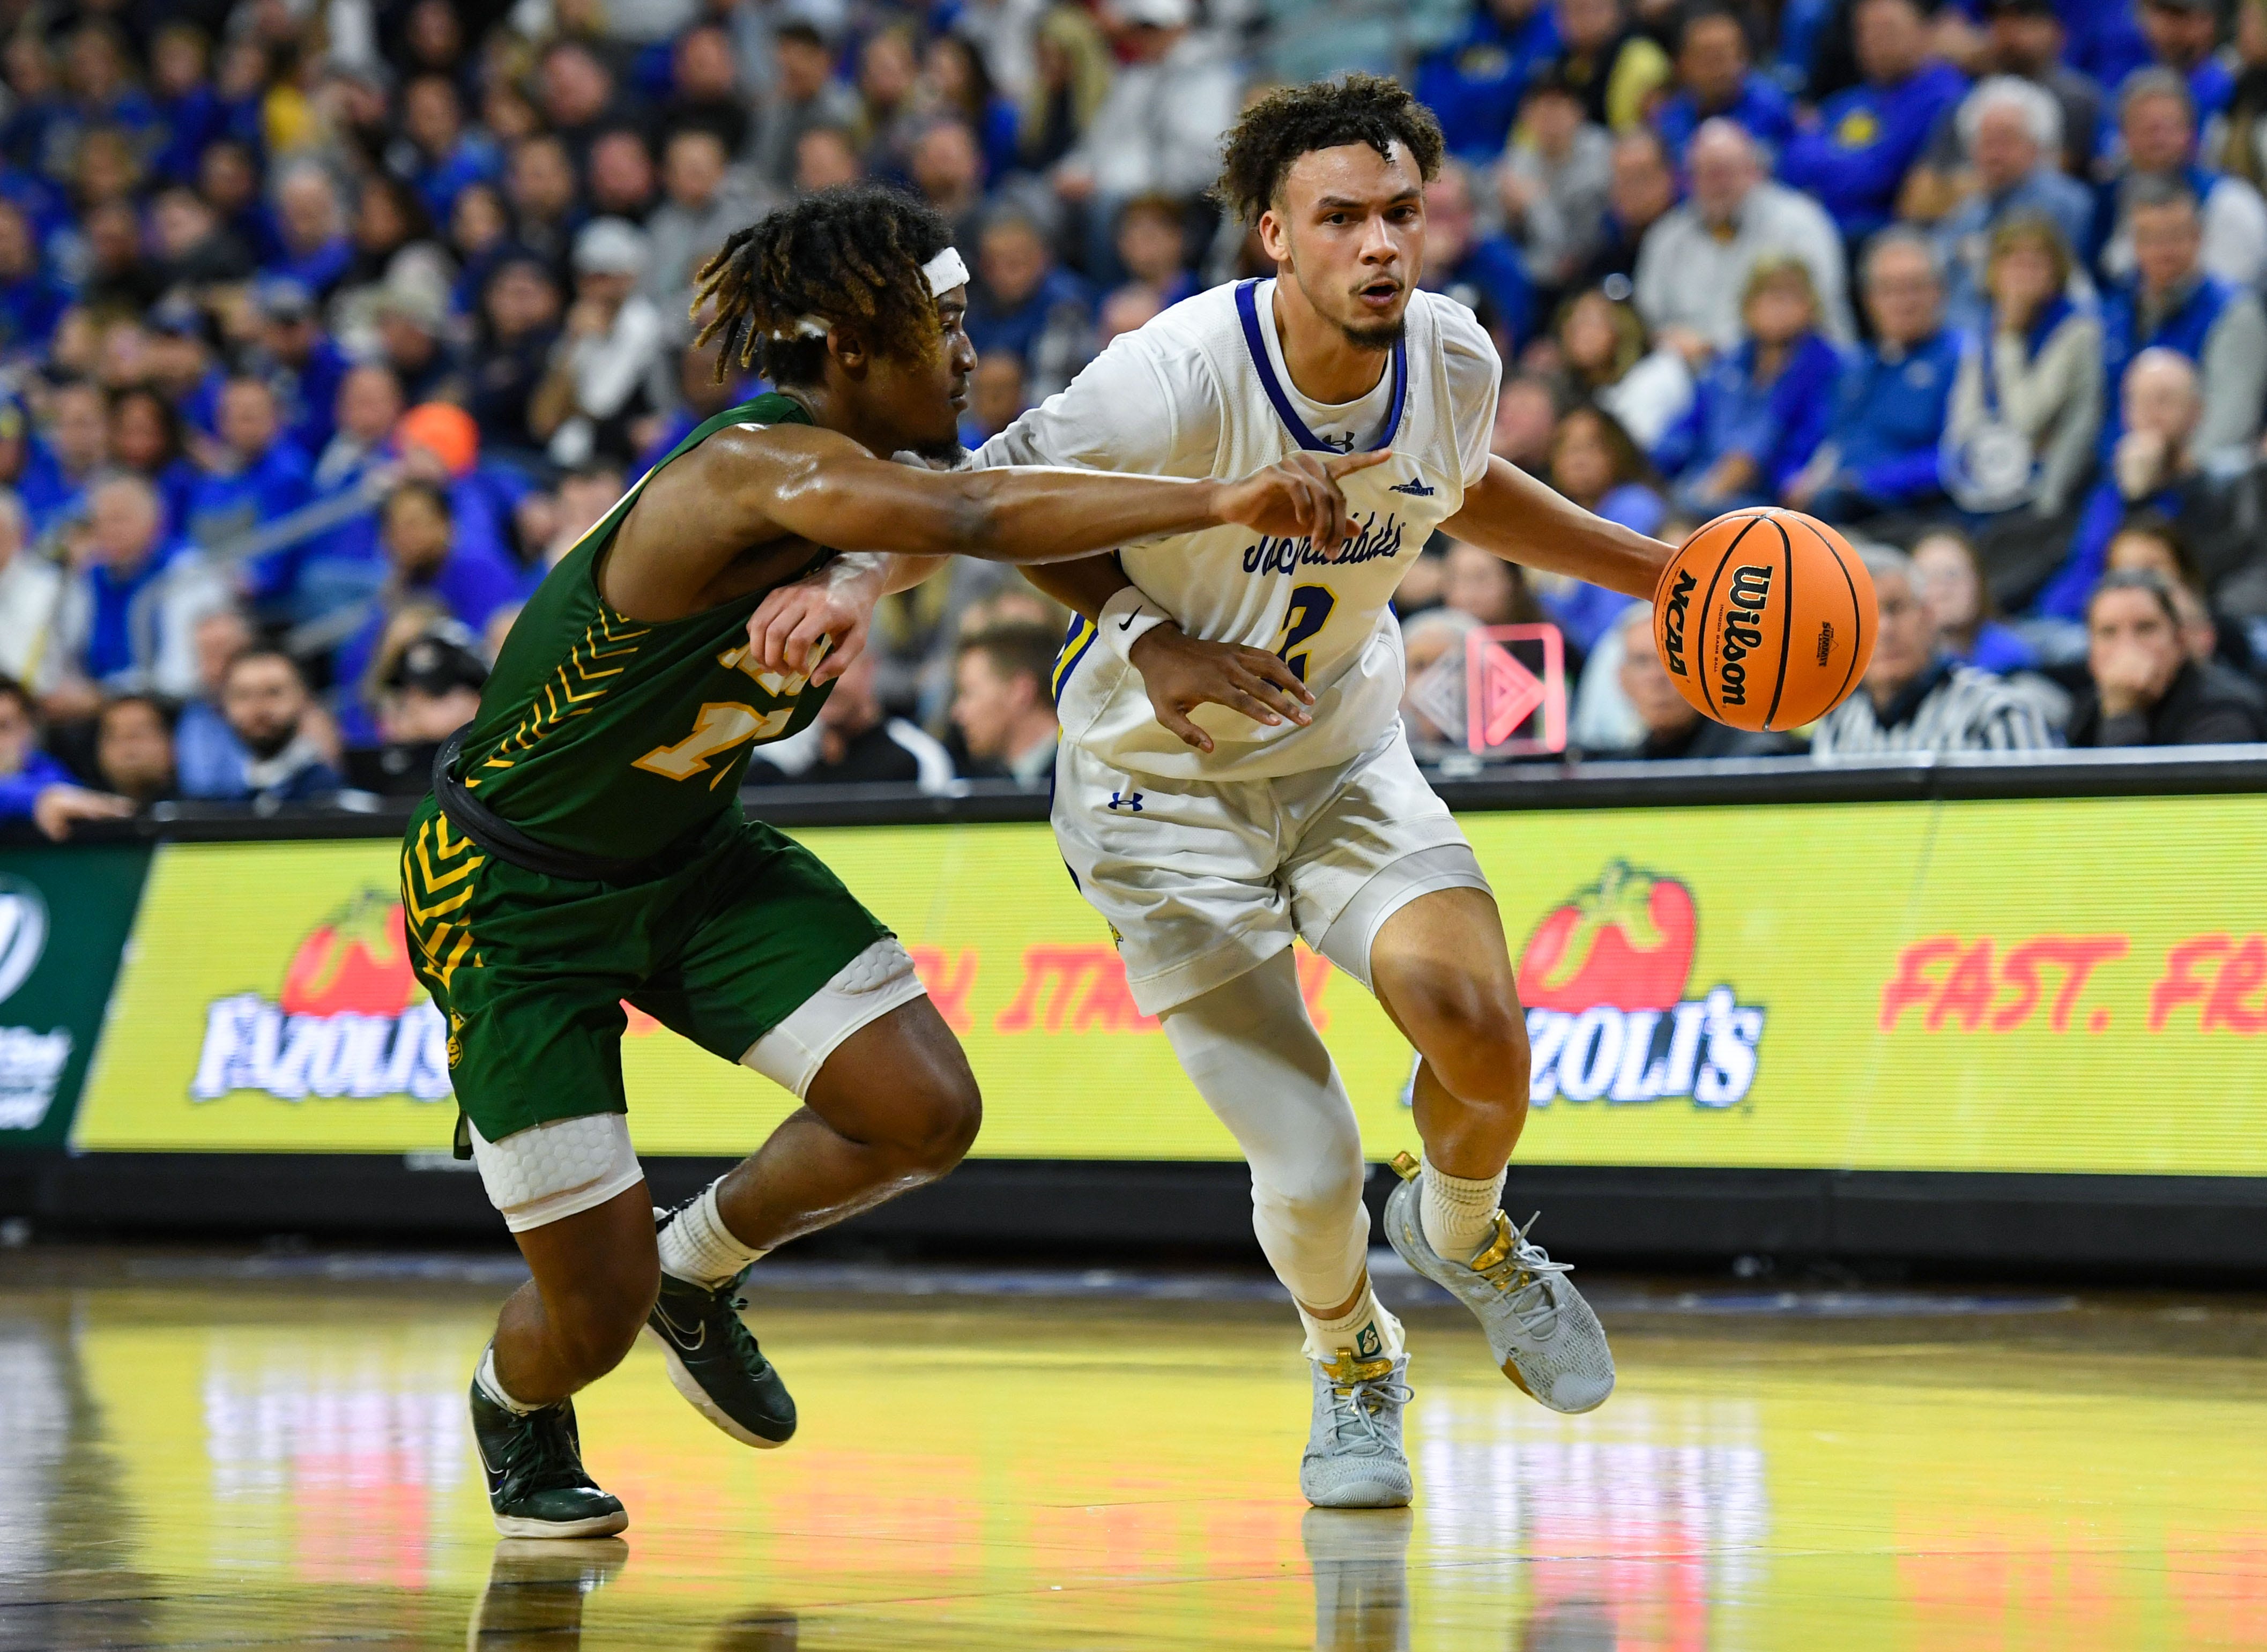 South Dakota State's Zeke Mayo dribbles toward the basket, guarded by North Dakota State's Damari Wheeler-Thomas in the Summit League men's semifinals on Monday, March 6, 2023, at the Denny Sanford Premier Center in Sioux Falls.